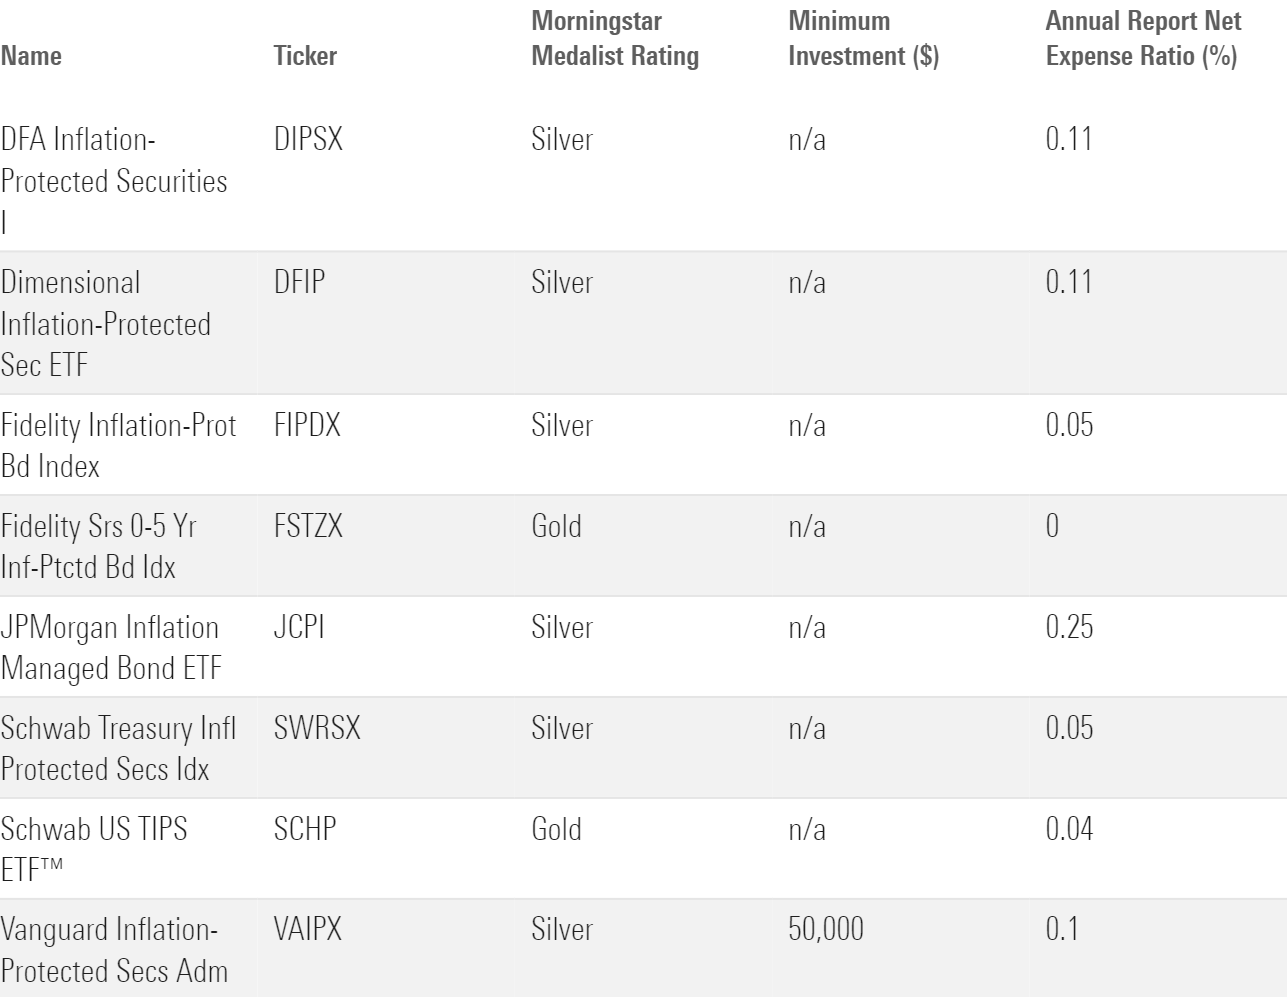 A table showing Morningstar Medalist Ratings and other key statistics for several TIPS funds.